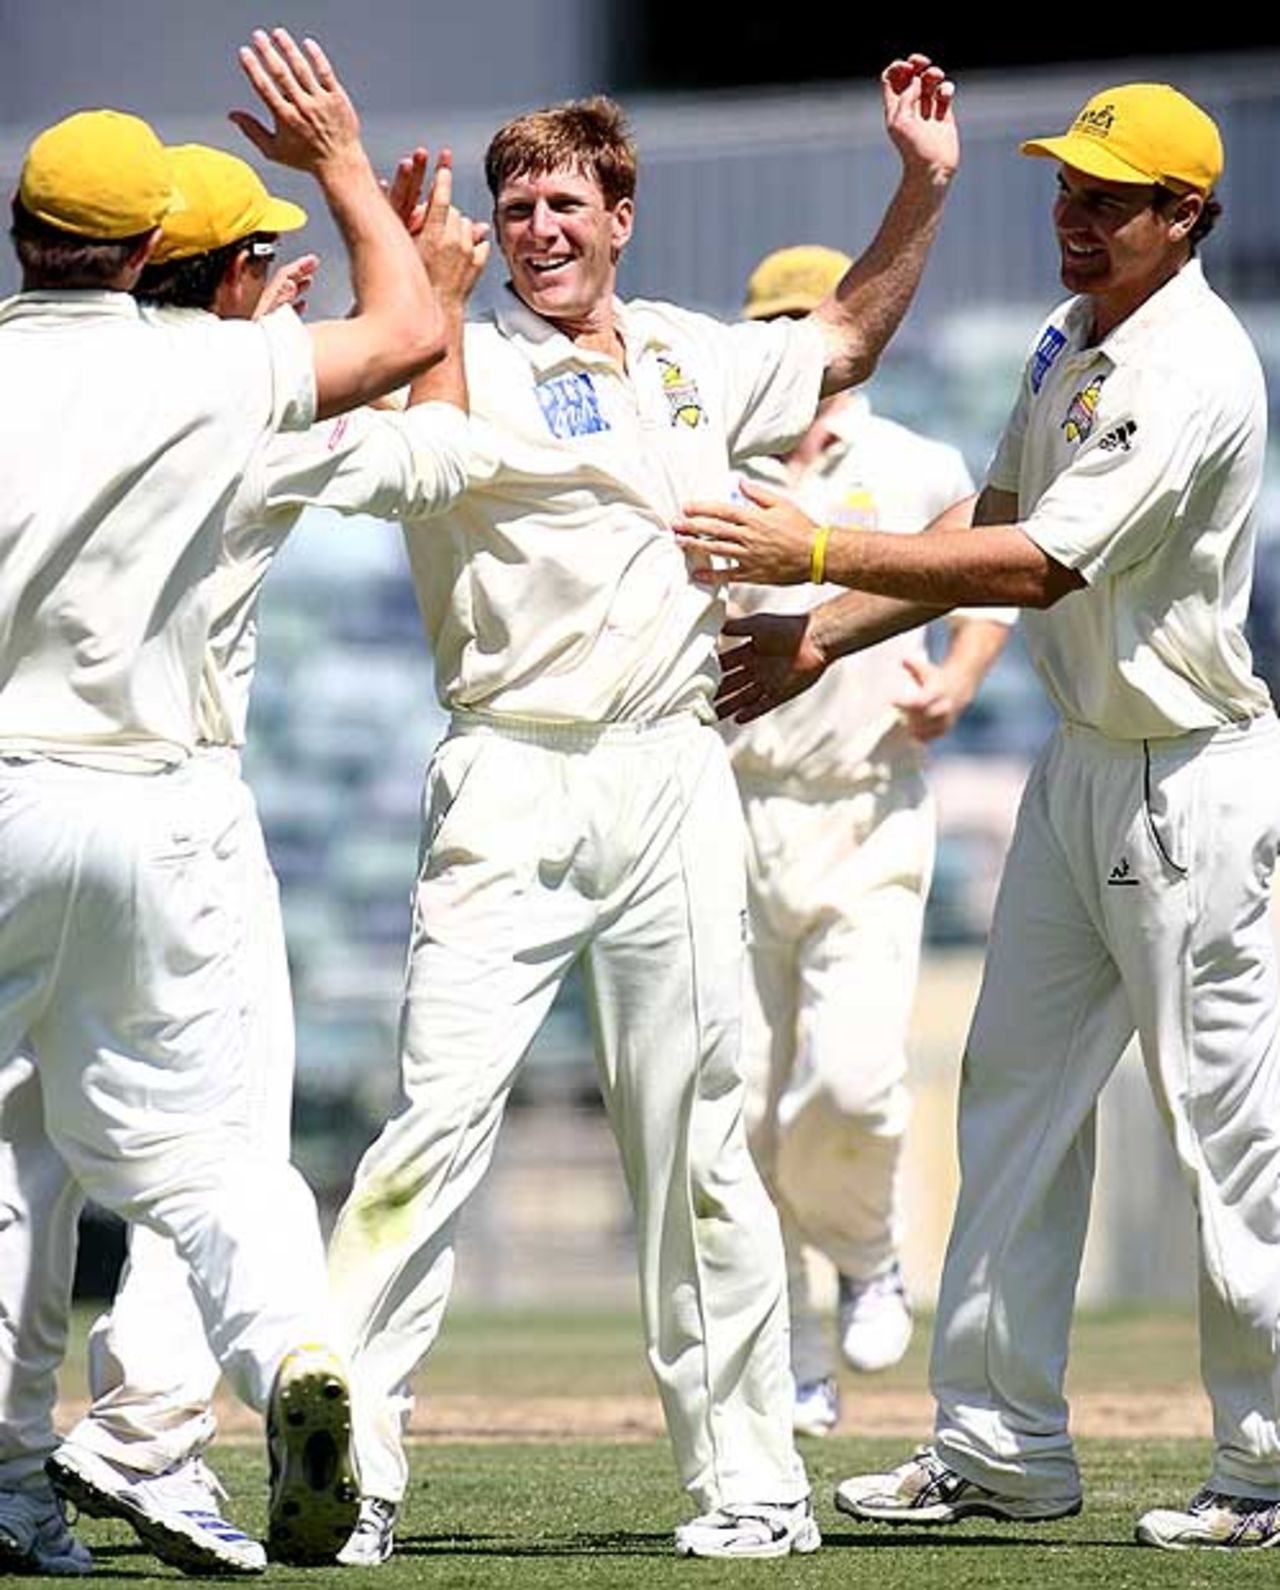 Mathew Inness is congratulated by team-mates after he took the wicket of Queensland's Clinton Perren, Western Australia v Queensland, Pura Cup, 1st day, November 9, 2007